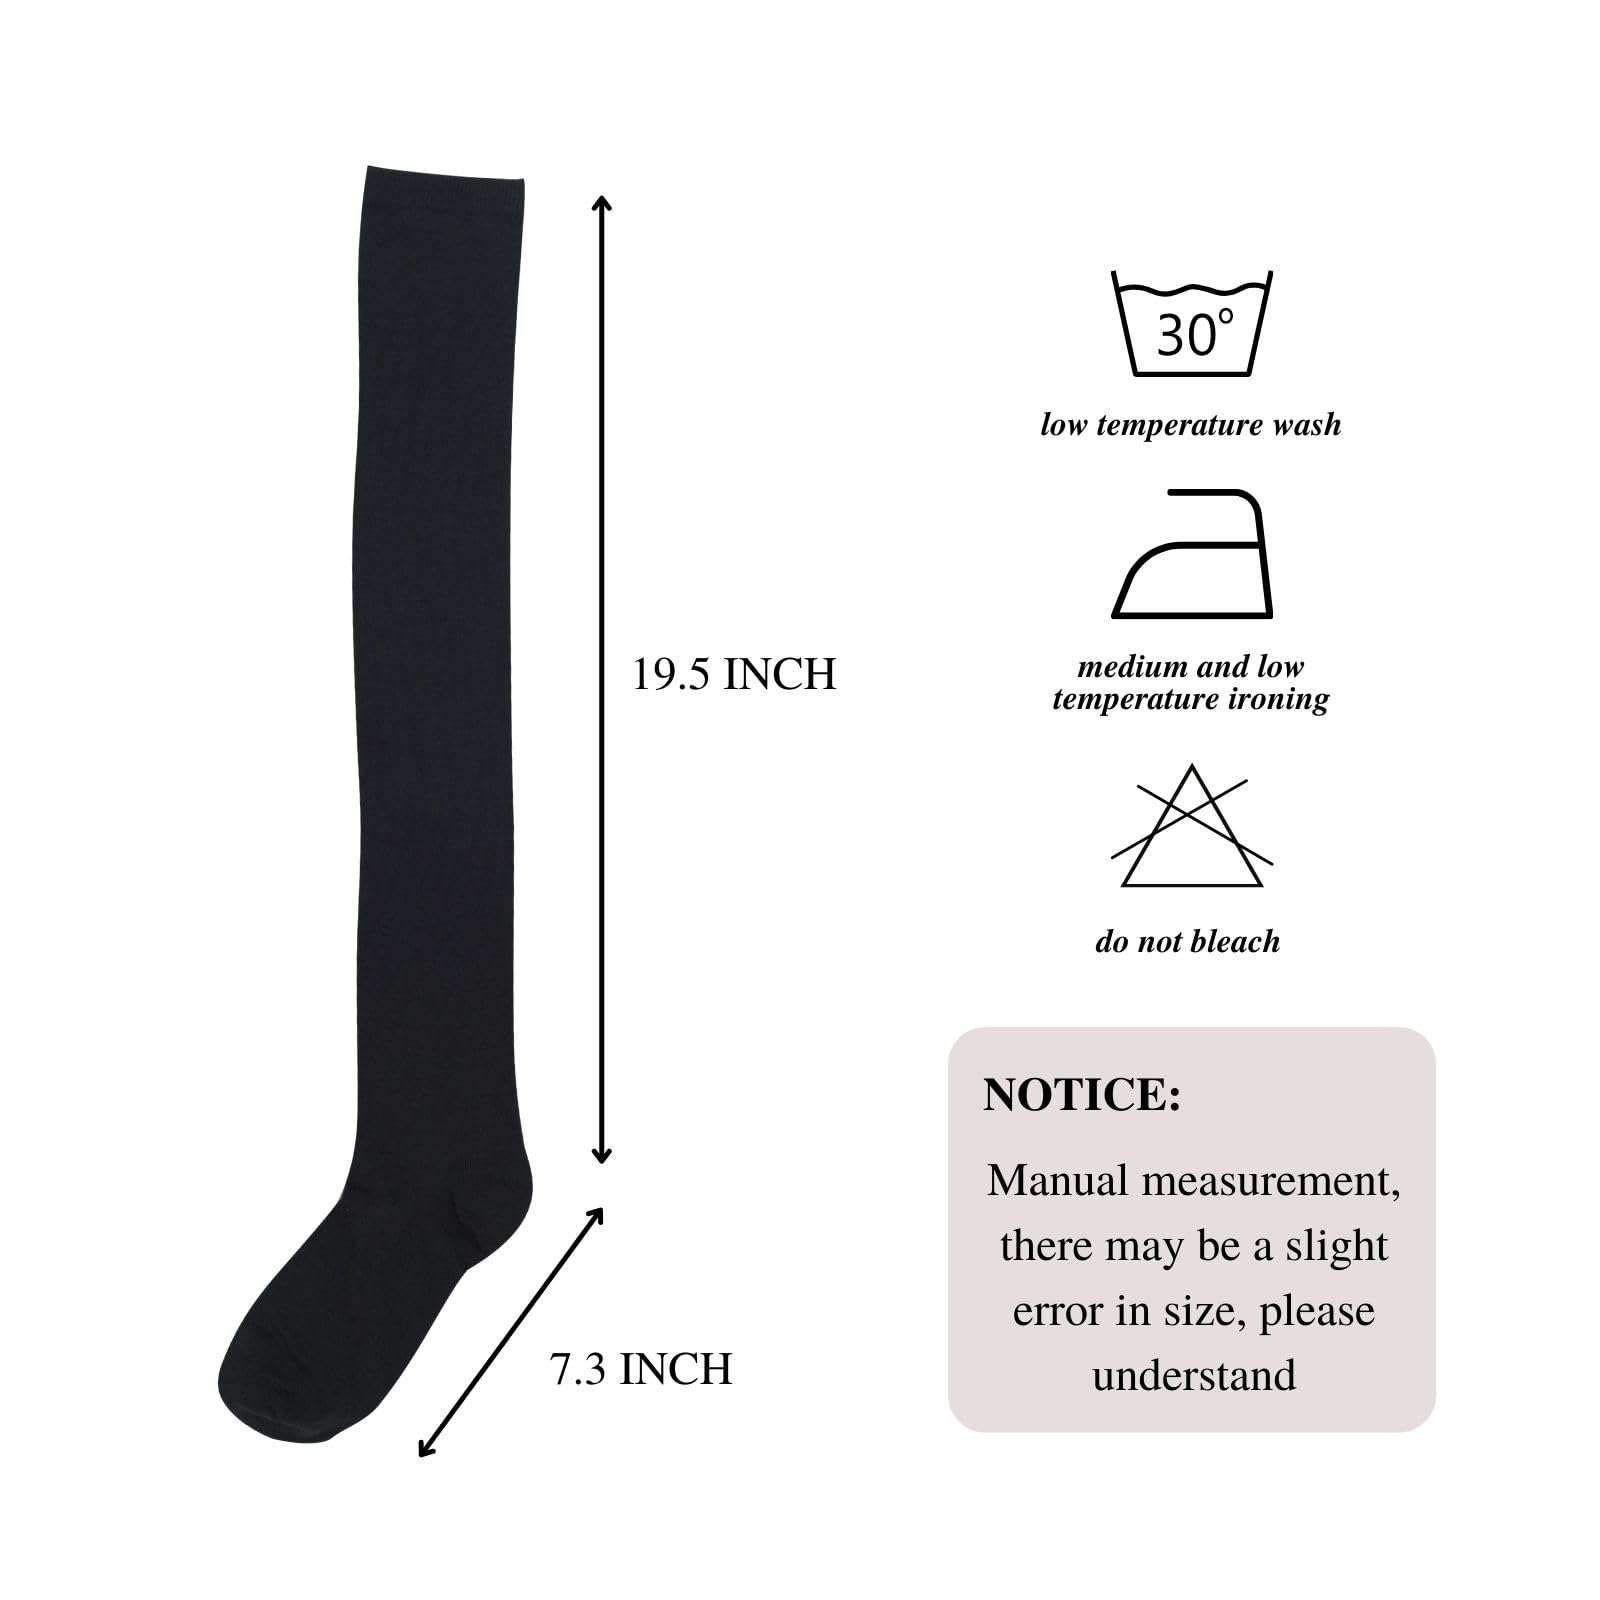 Intgoodluckycc Thigh High Socks, Long Knee High Socks for Women, Cute Womens Over The Knee Socks Stockings (3 Pairs, Mixed Colors 4)